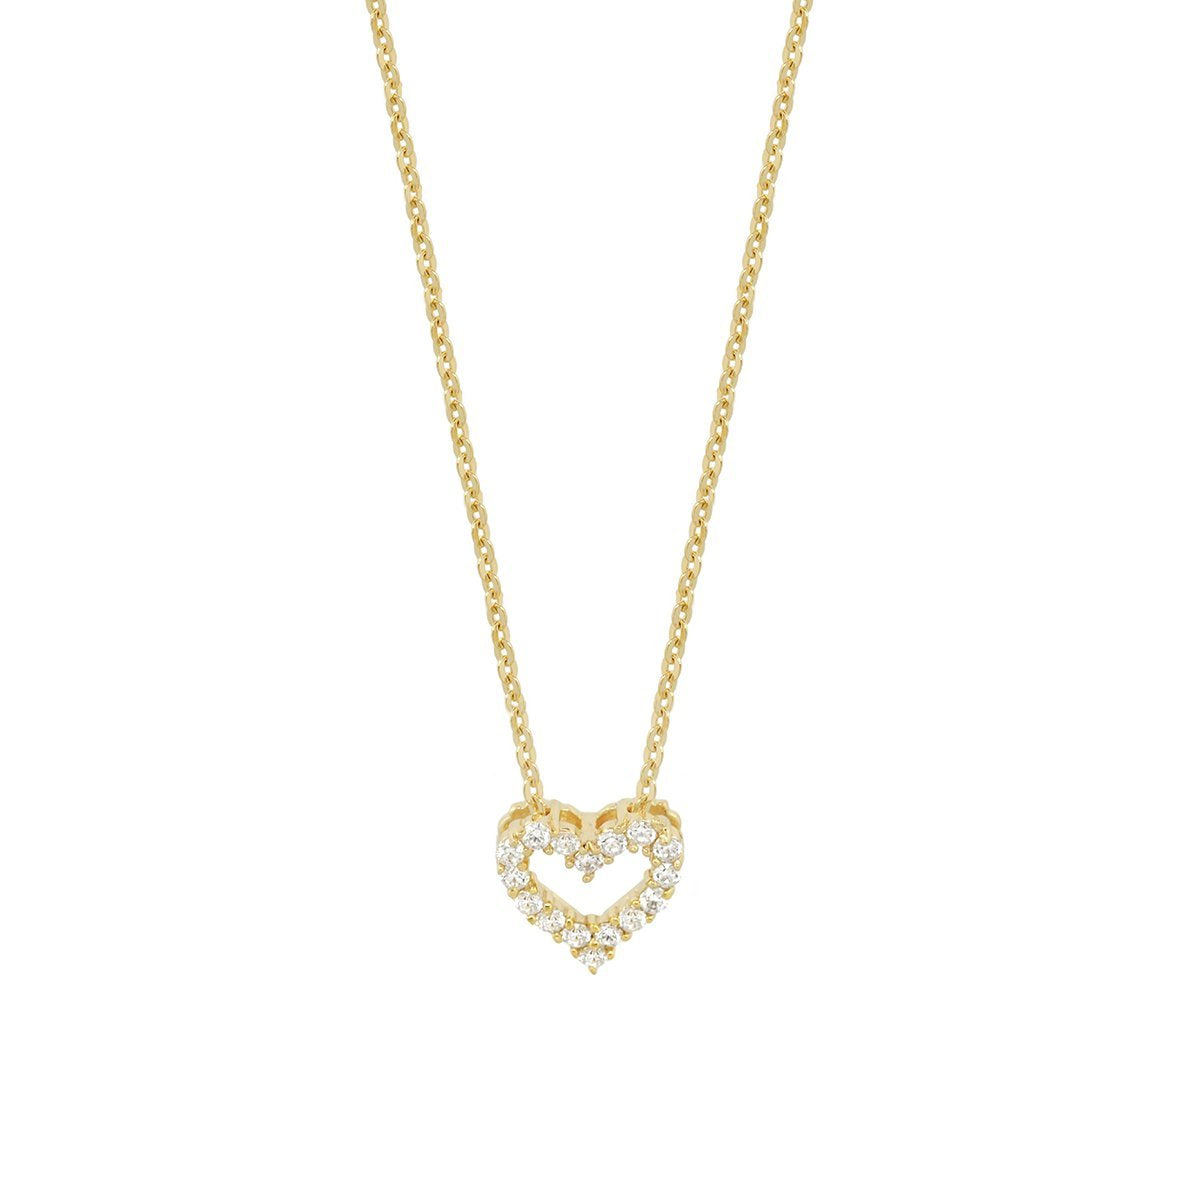 Childrens Heart Necklace